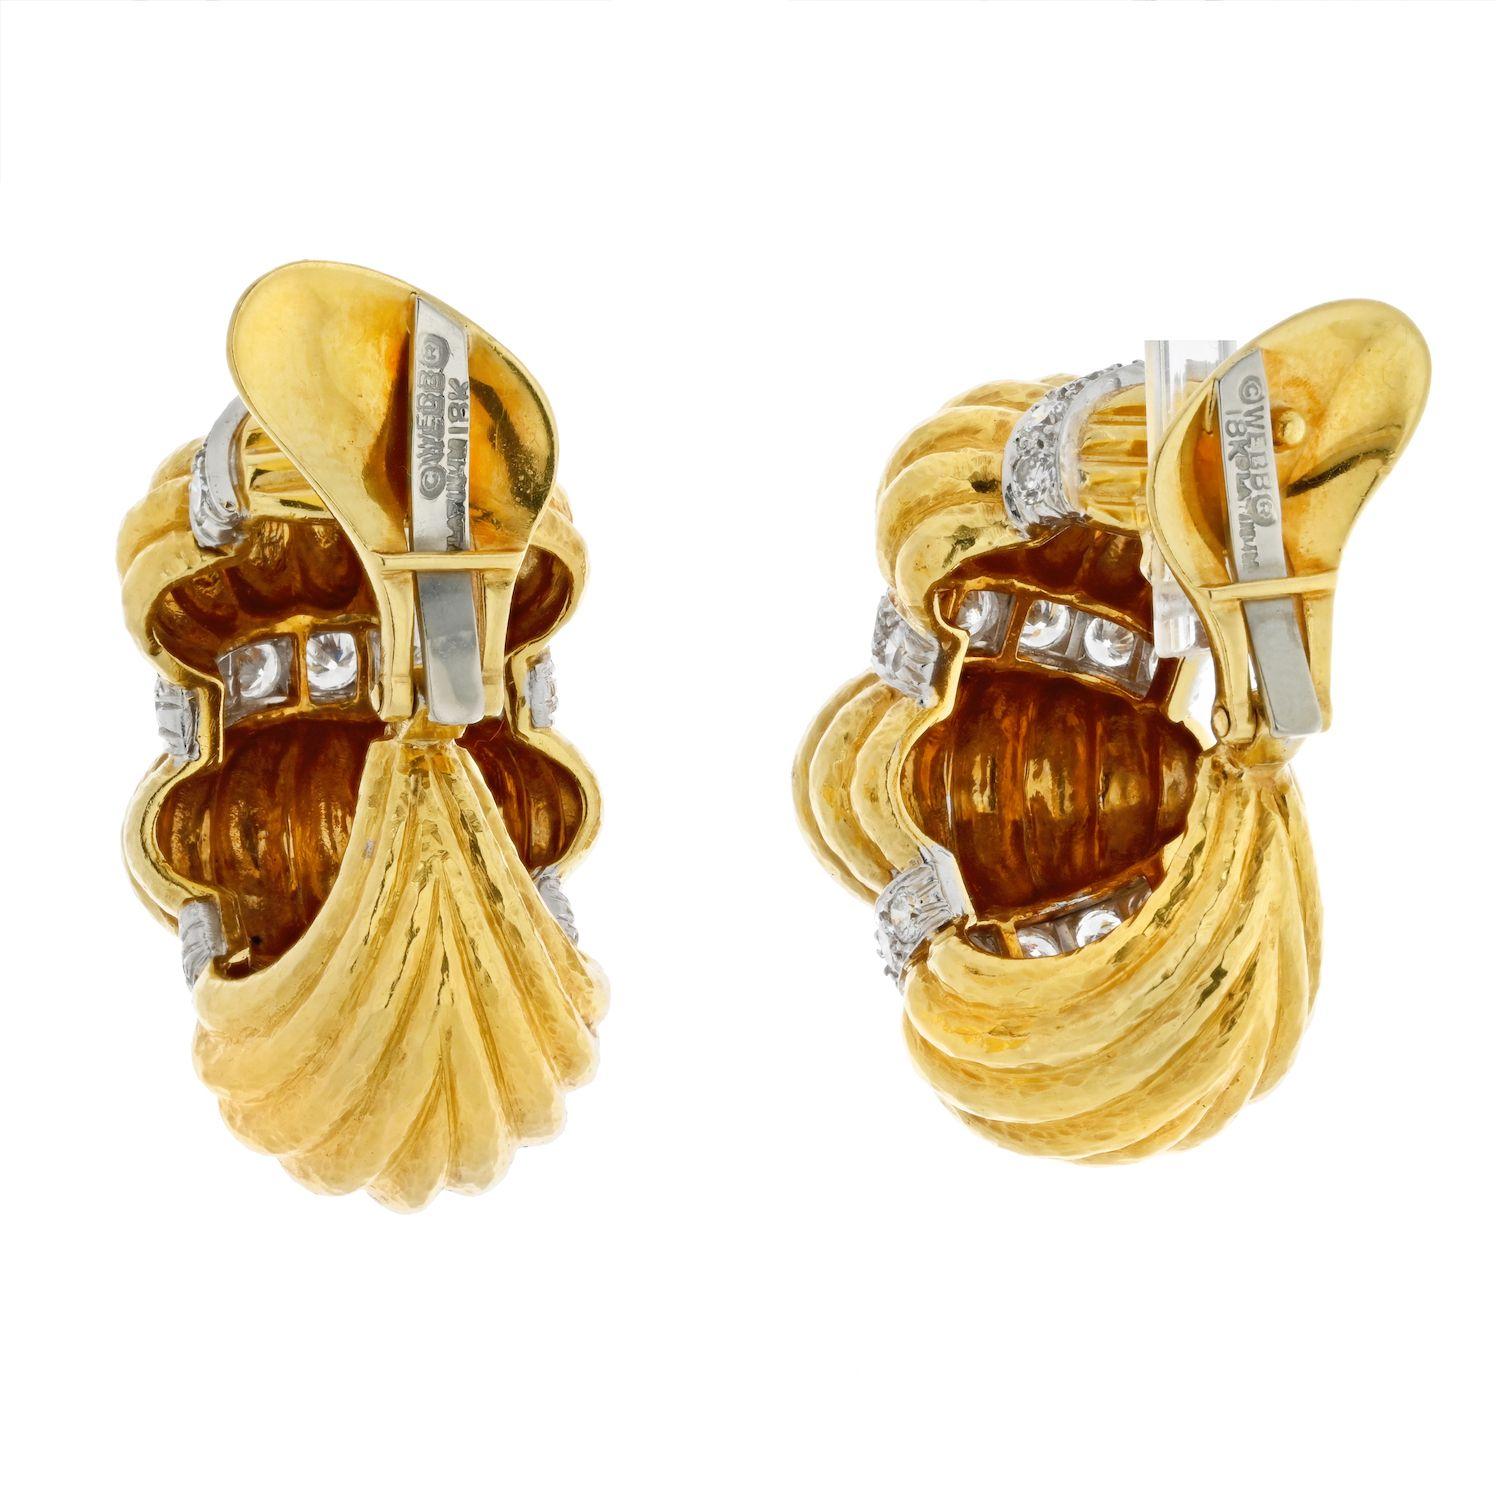 These vintage fluted tiered shrimp by David Webb clip-on earrings are the perfect statement piece for any outfit. They feature a unique design that is sure to turn heads and add a touch of elegance. The intricate details of the fluted tiers,